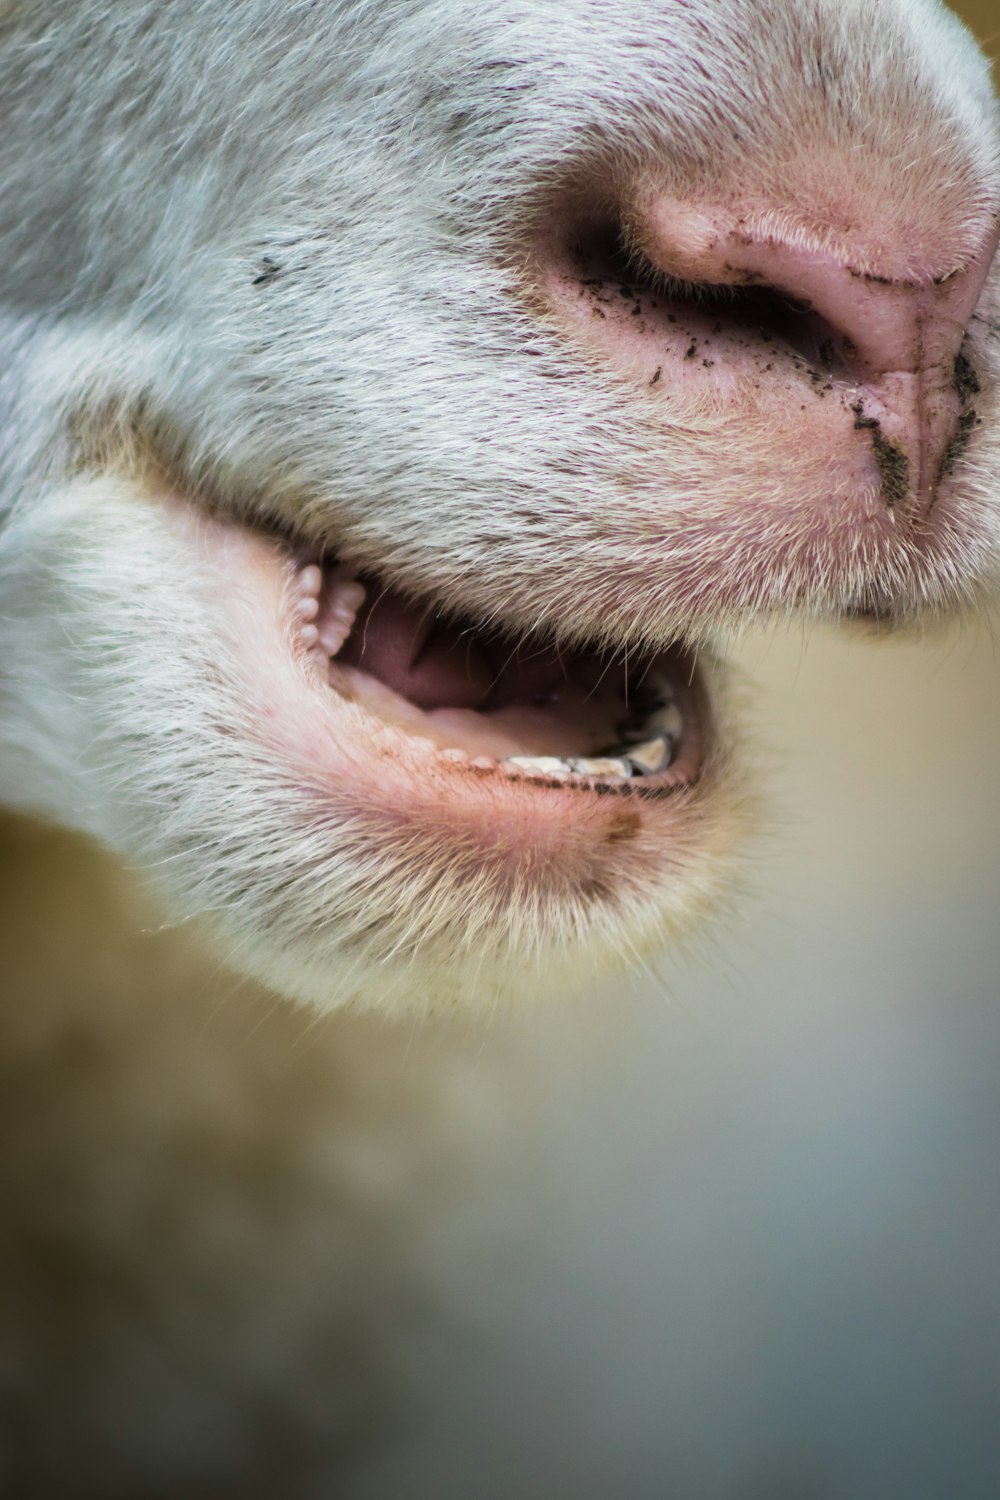 a close up of a sheep's face with it's mouth open